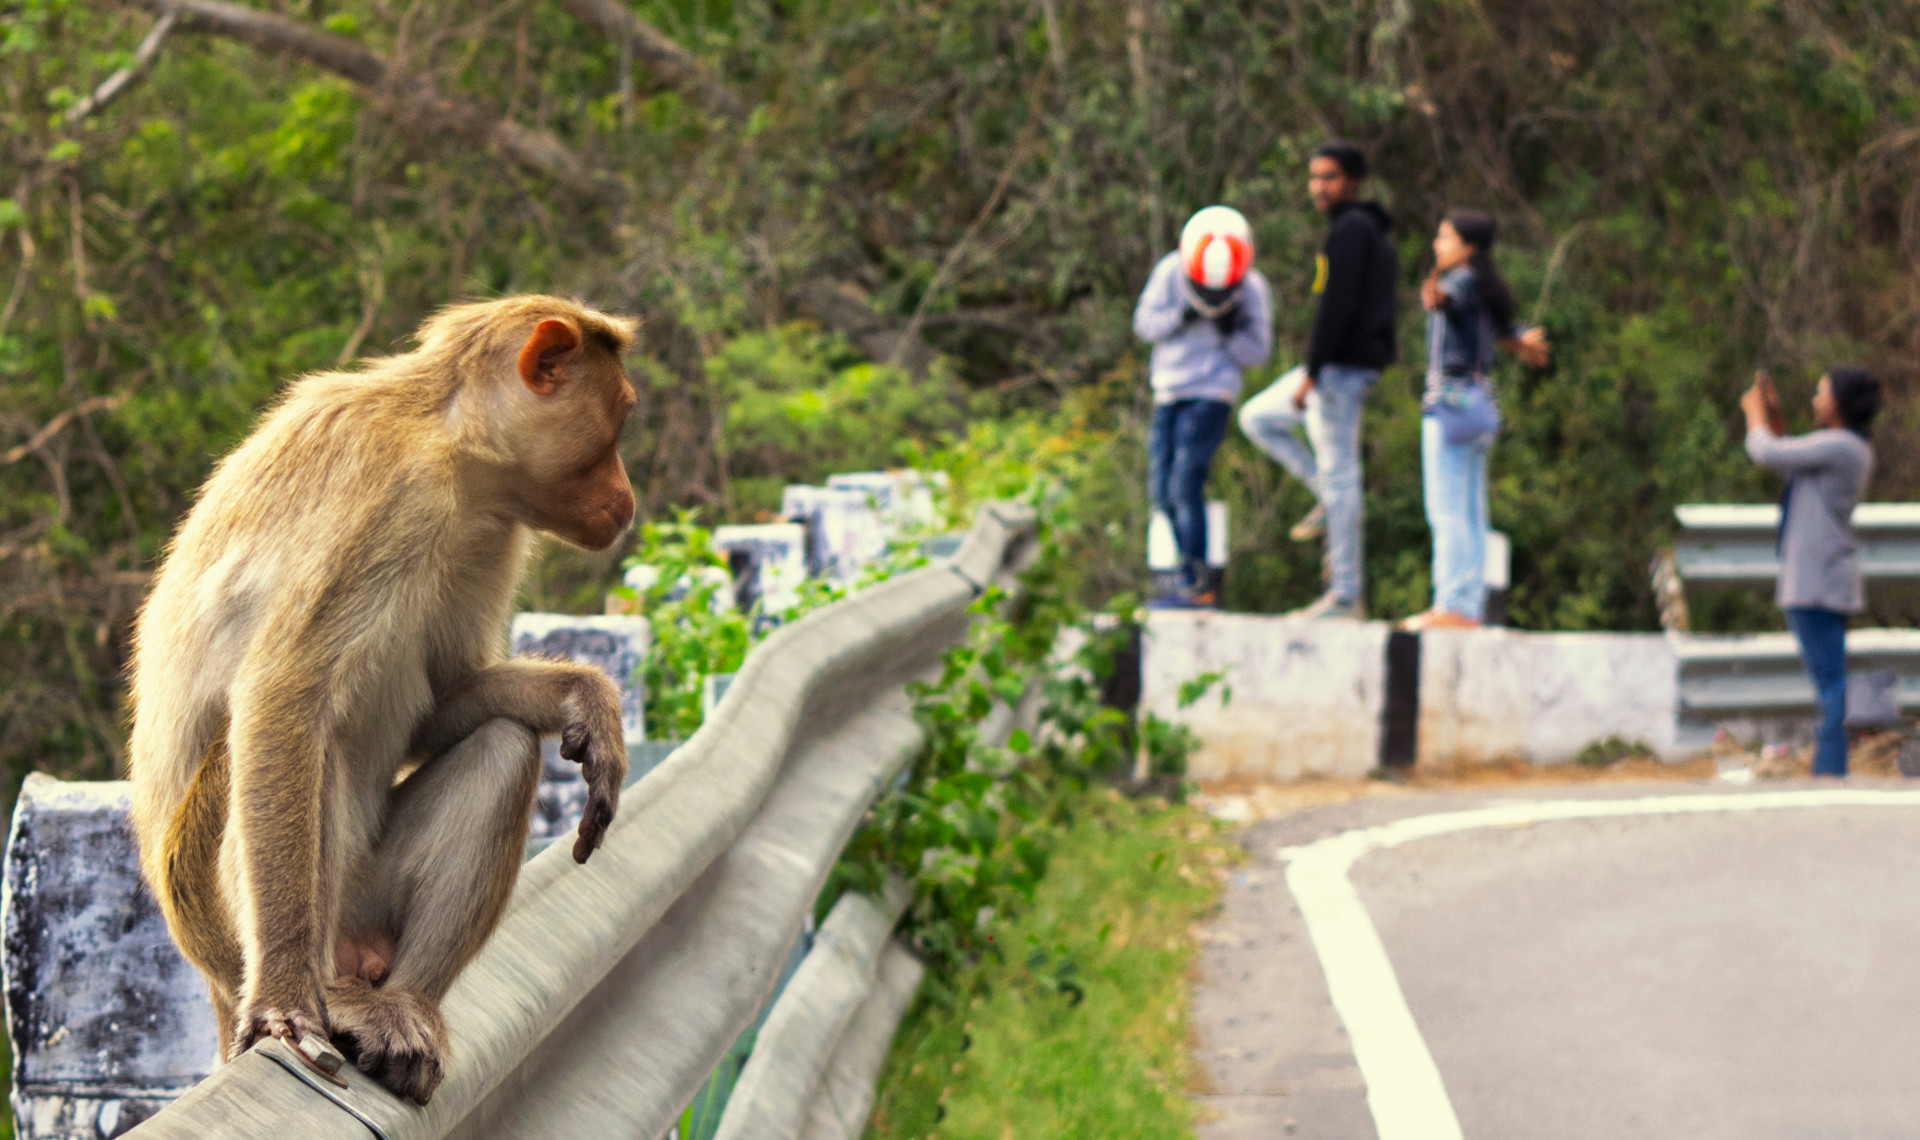 A photograph of a monkey on the left part of the frame looking at a bunch of youngsters taking comical photographs on top of the road guard rails.